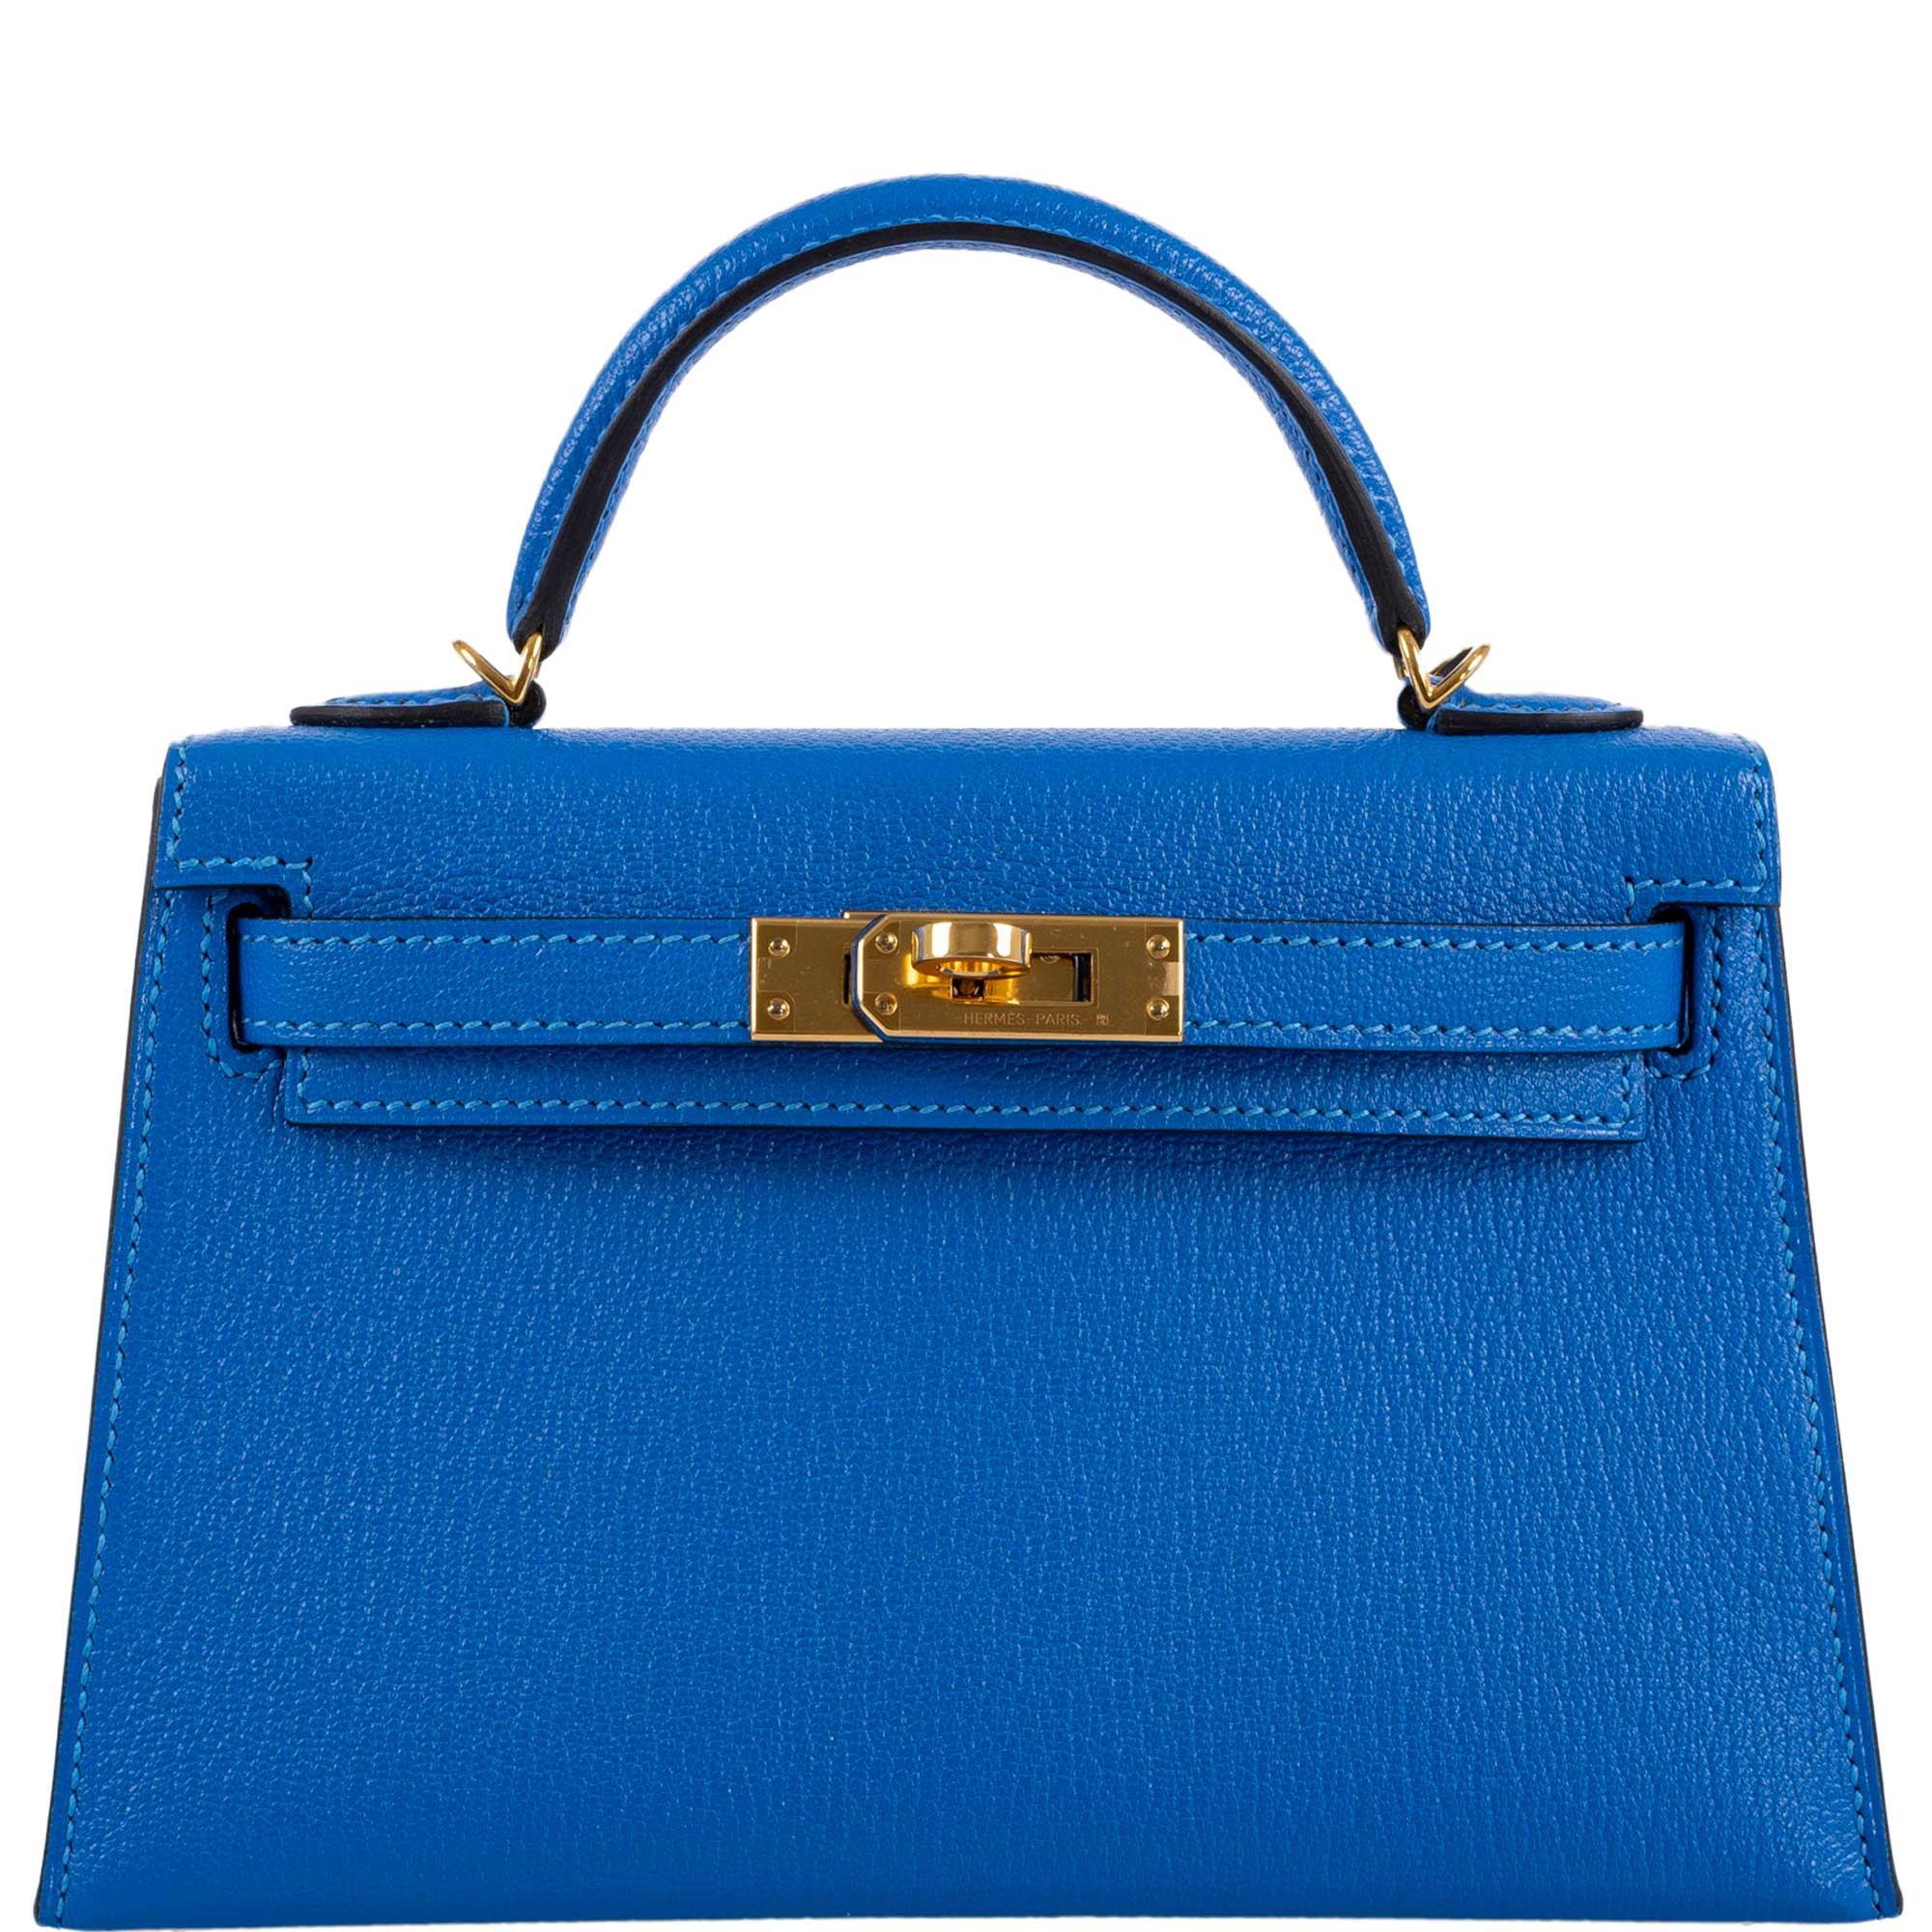 Authentic New Hermes Kelly 32 GHW Bicolor Toile & Blue Marine With